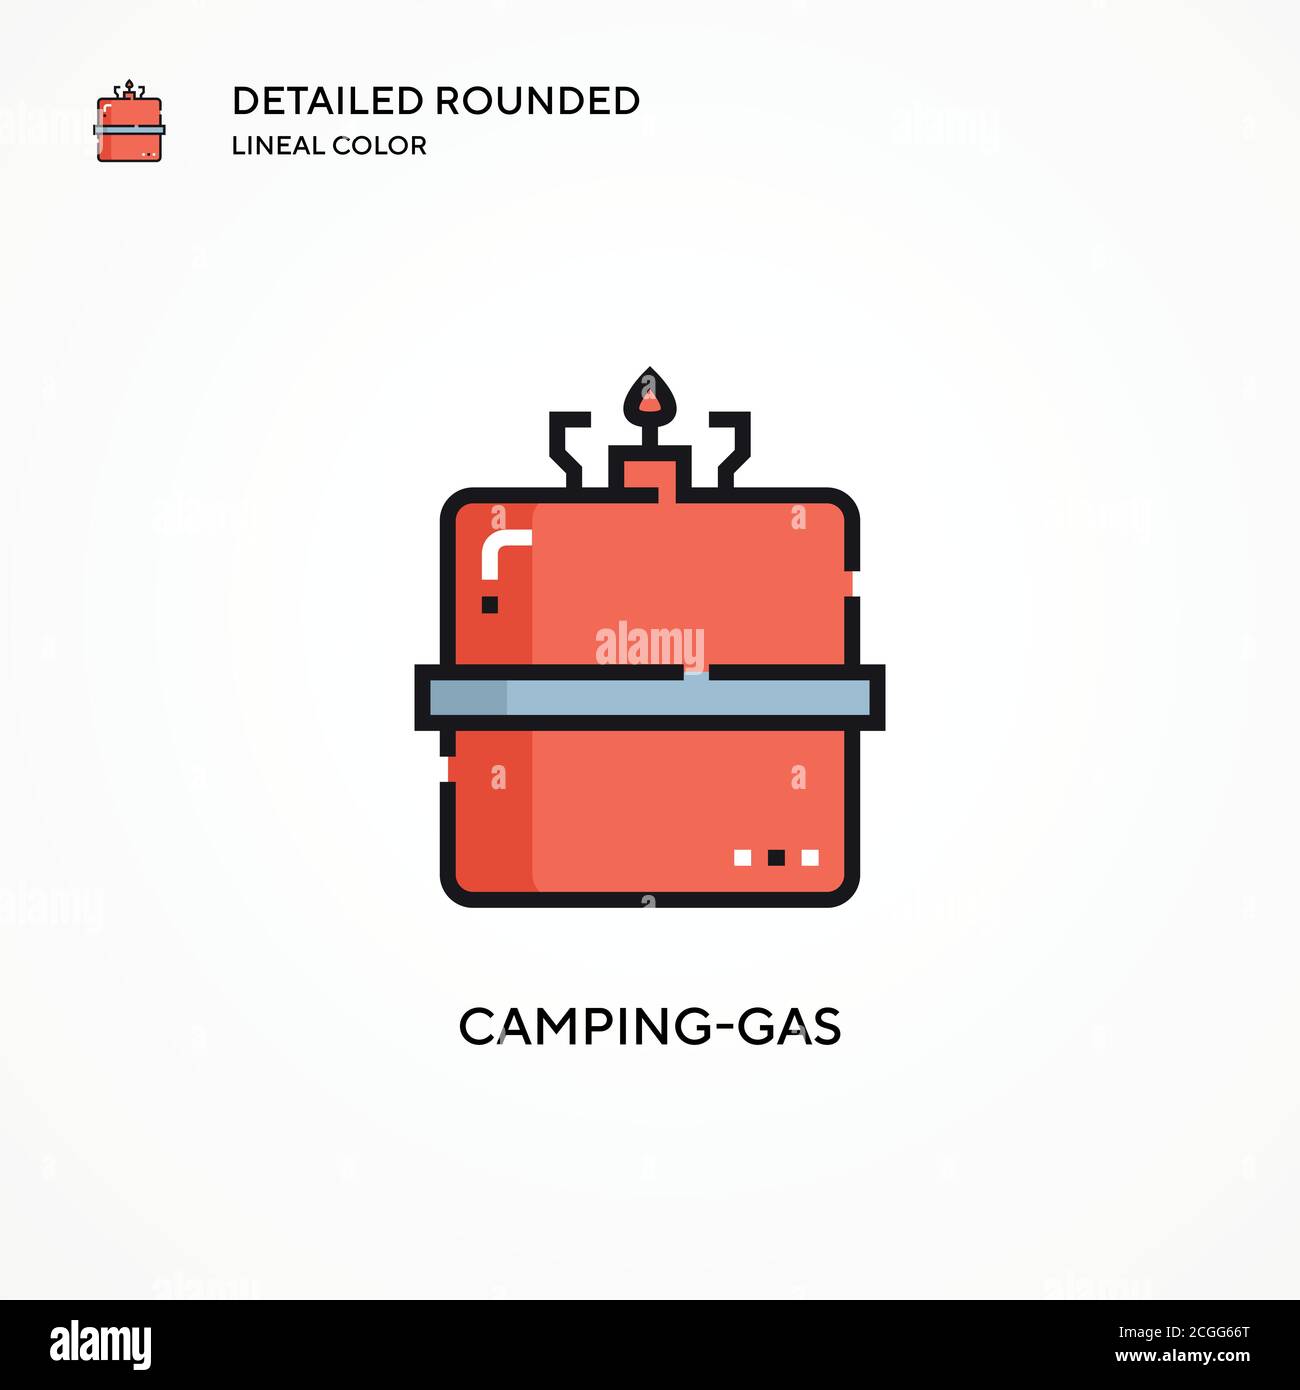 Camping-gas vector icon. Modern vector illustration concepts. Easy to edit and customize. Stock Vector